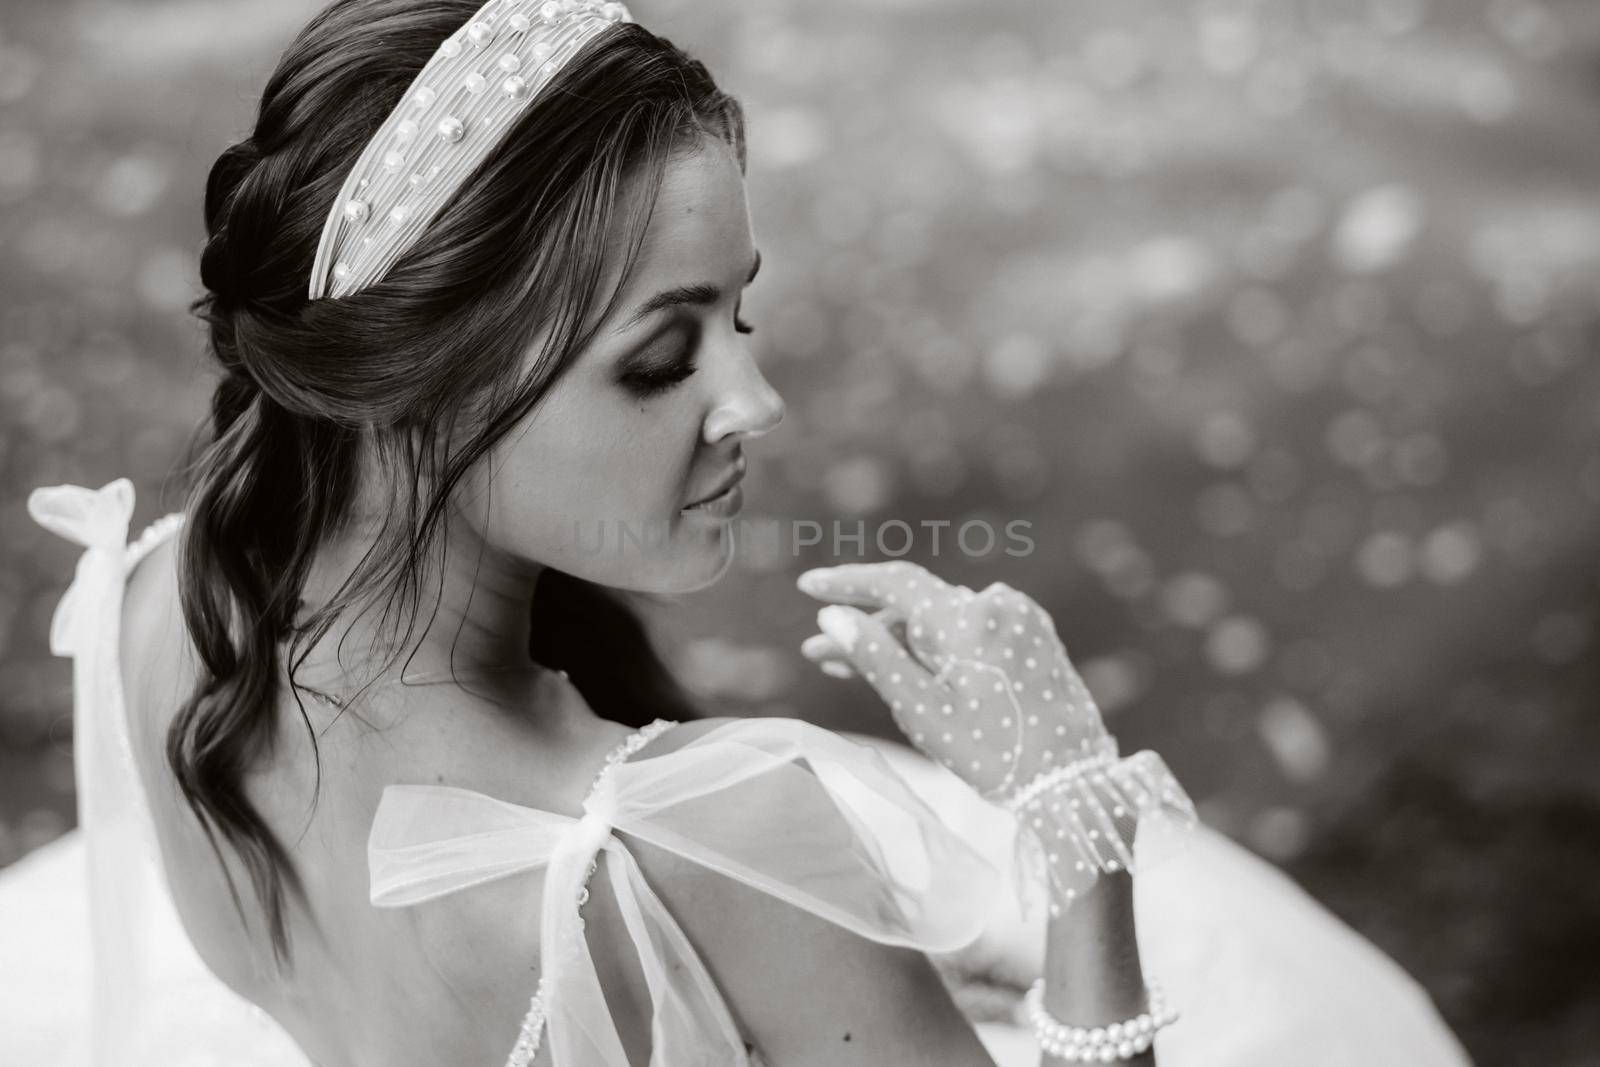 An elegant bride in a white dress, gloves and bare feet is sitting near a waterfall in the Park enjoying nature.A model in a wedding dress and gloves at a nature Park.Belarus. black and white photo by Lobachad